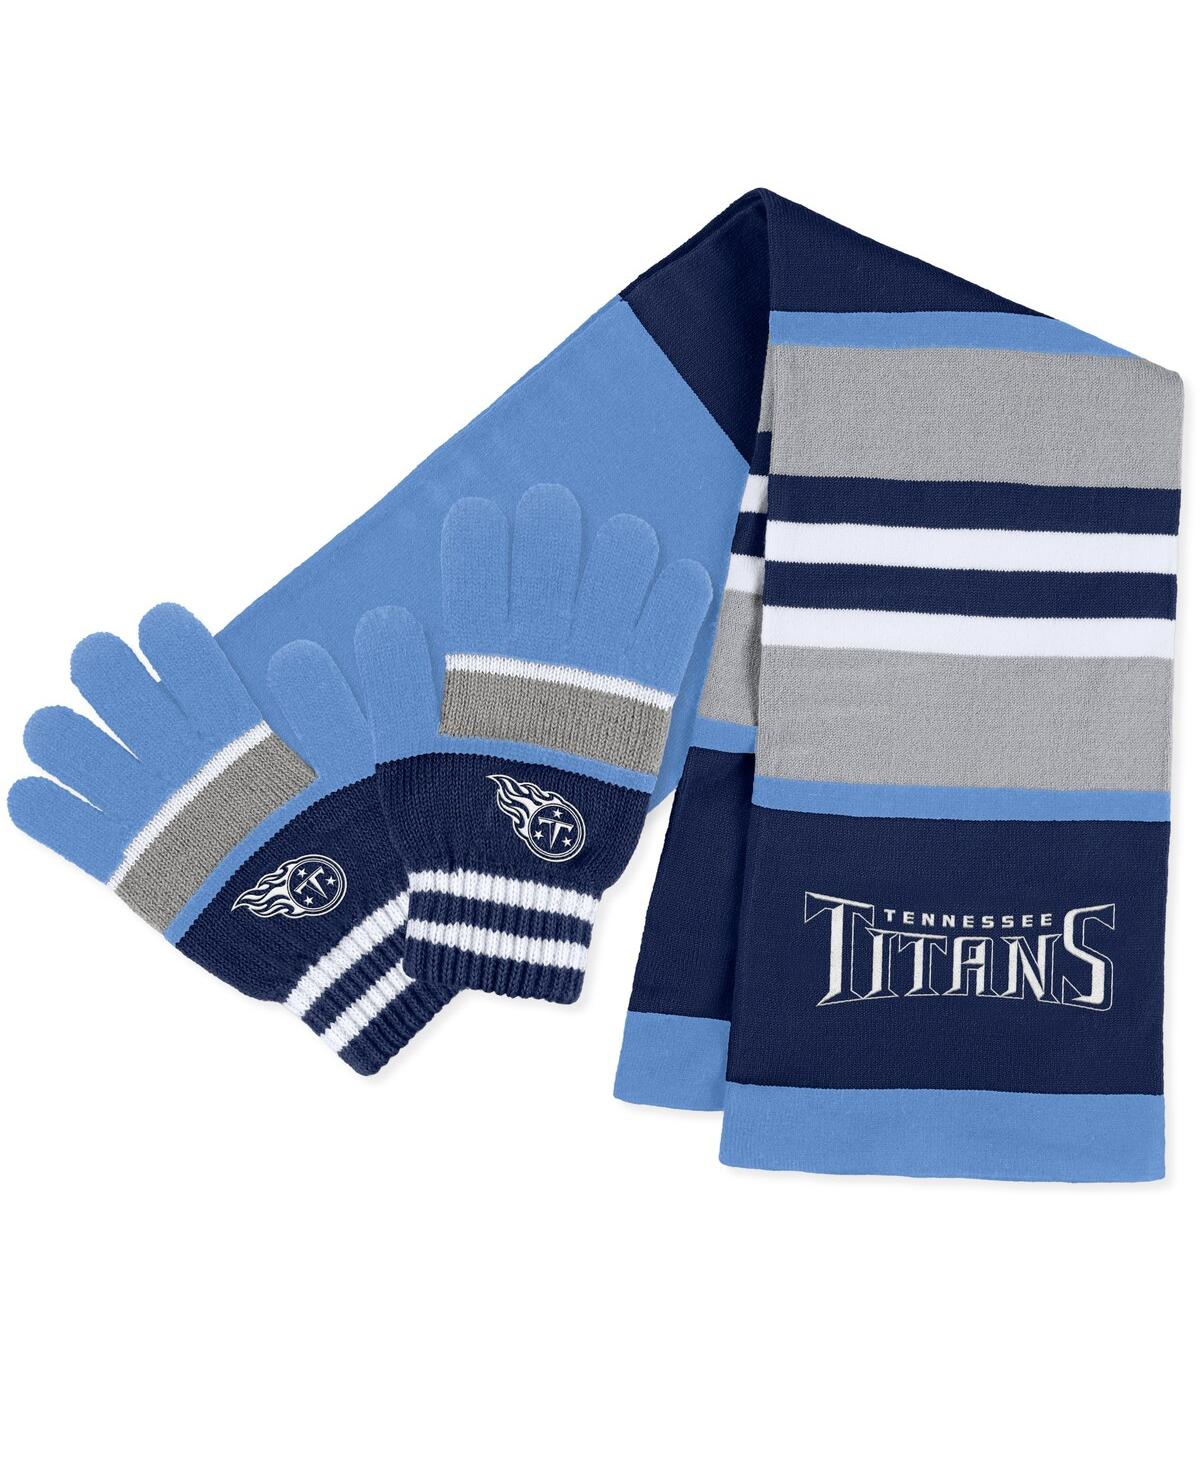 Women's Wear by Erin Andrews Tennessee Titans Stripe Glove and Scarf Set - Blue